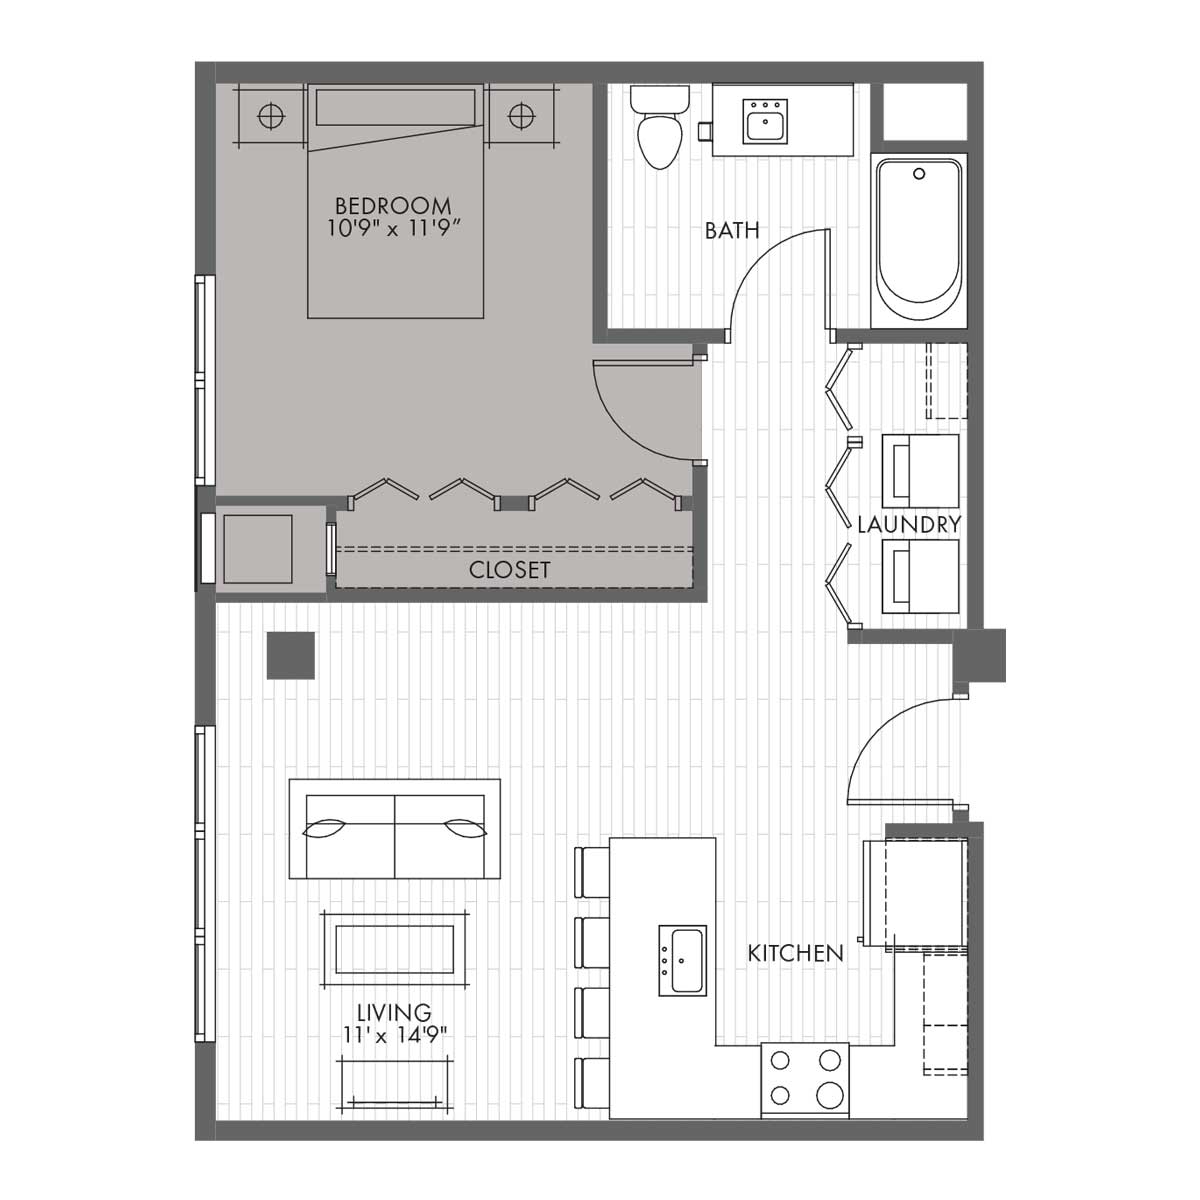 One Bedroom Floor Plan With Dimensions